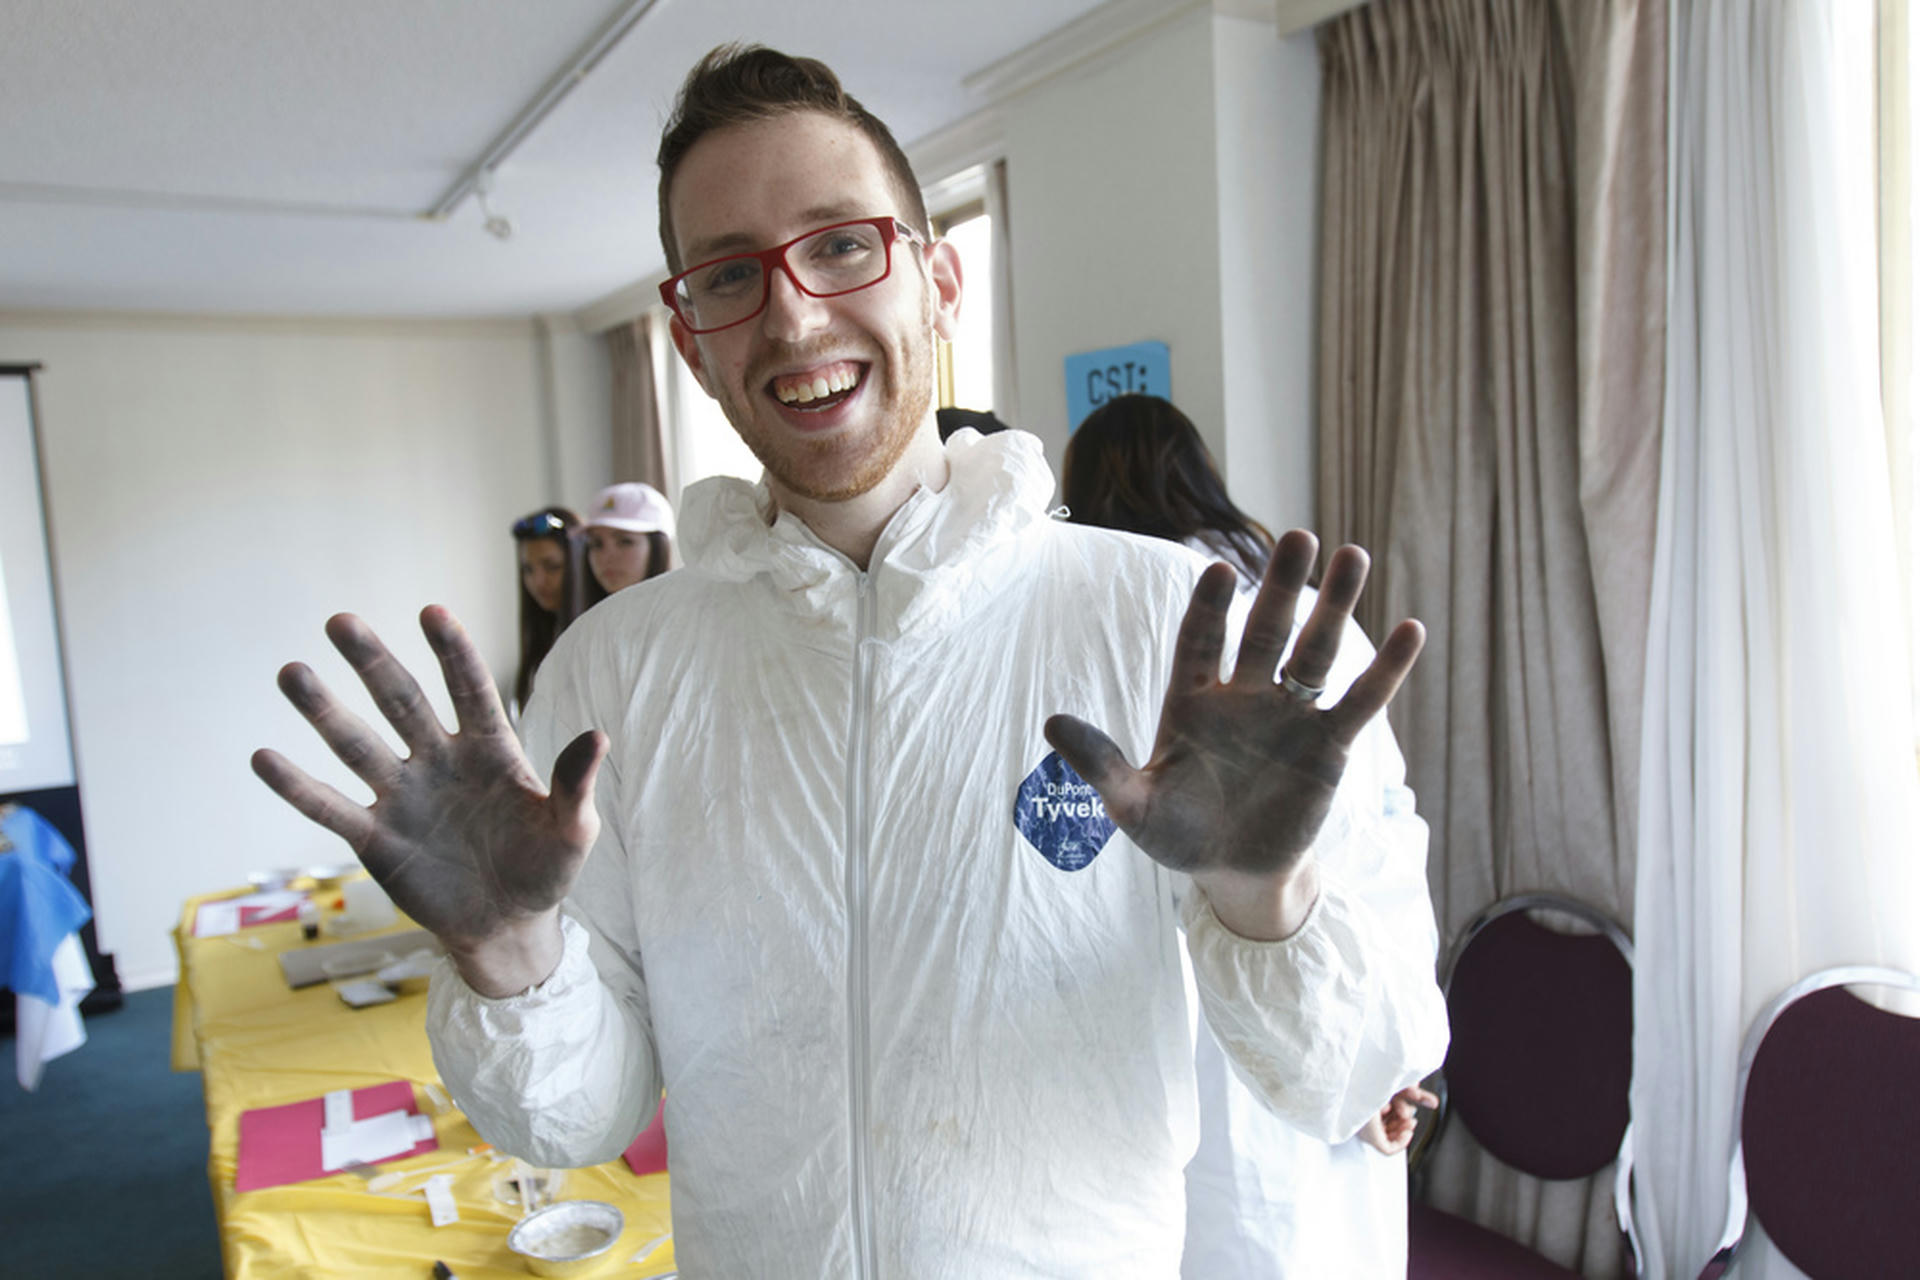 Our team at Science Venture also ran multiple workshops. Andrew MacLean, our director, might have had too much fun fingerprinting.